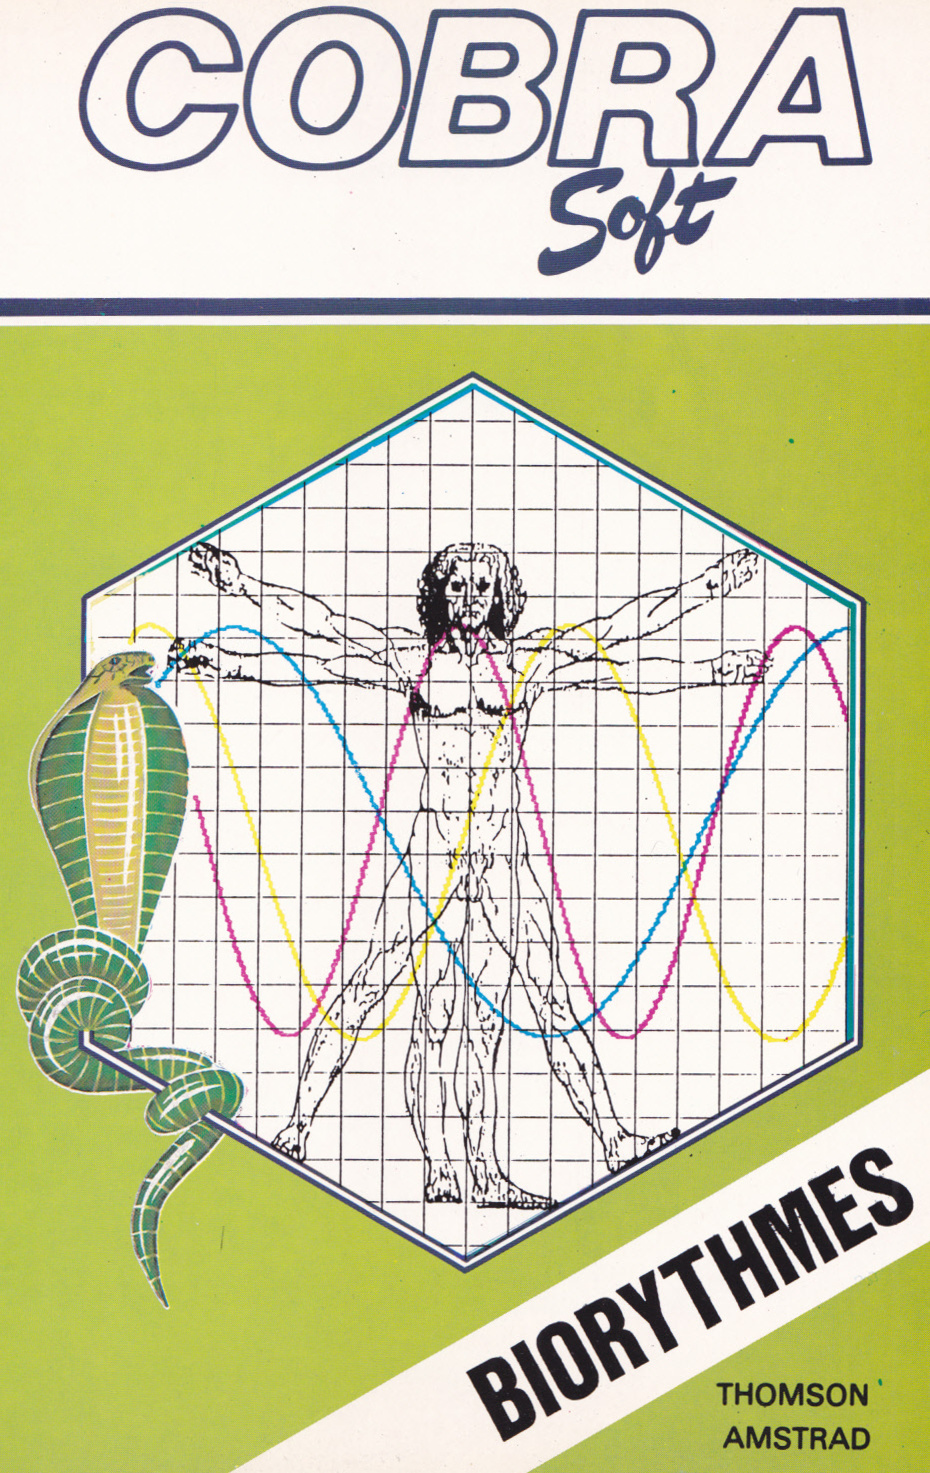 cover of the Amstrad CPC game Biorythmes  by GameBase CPC